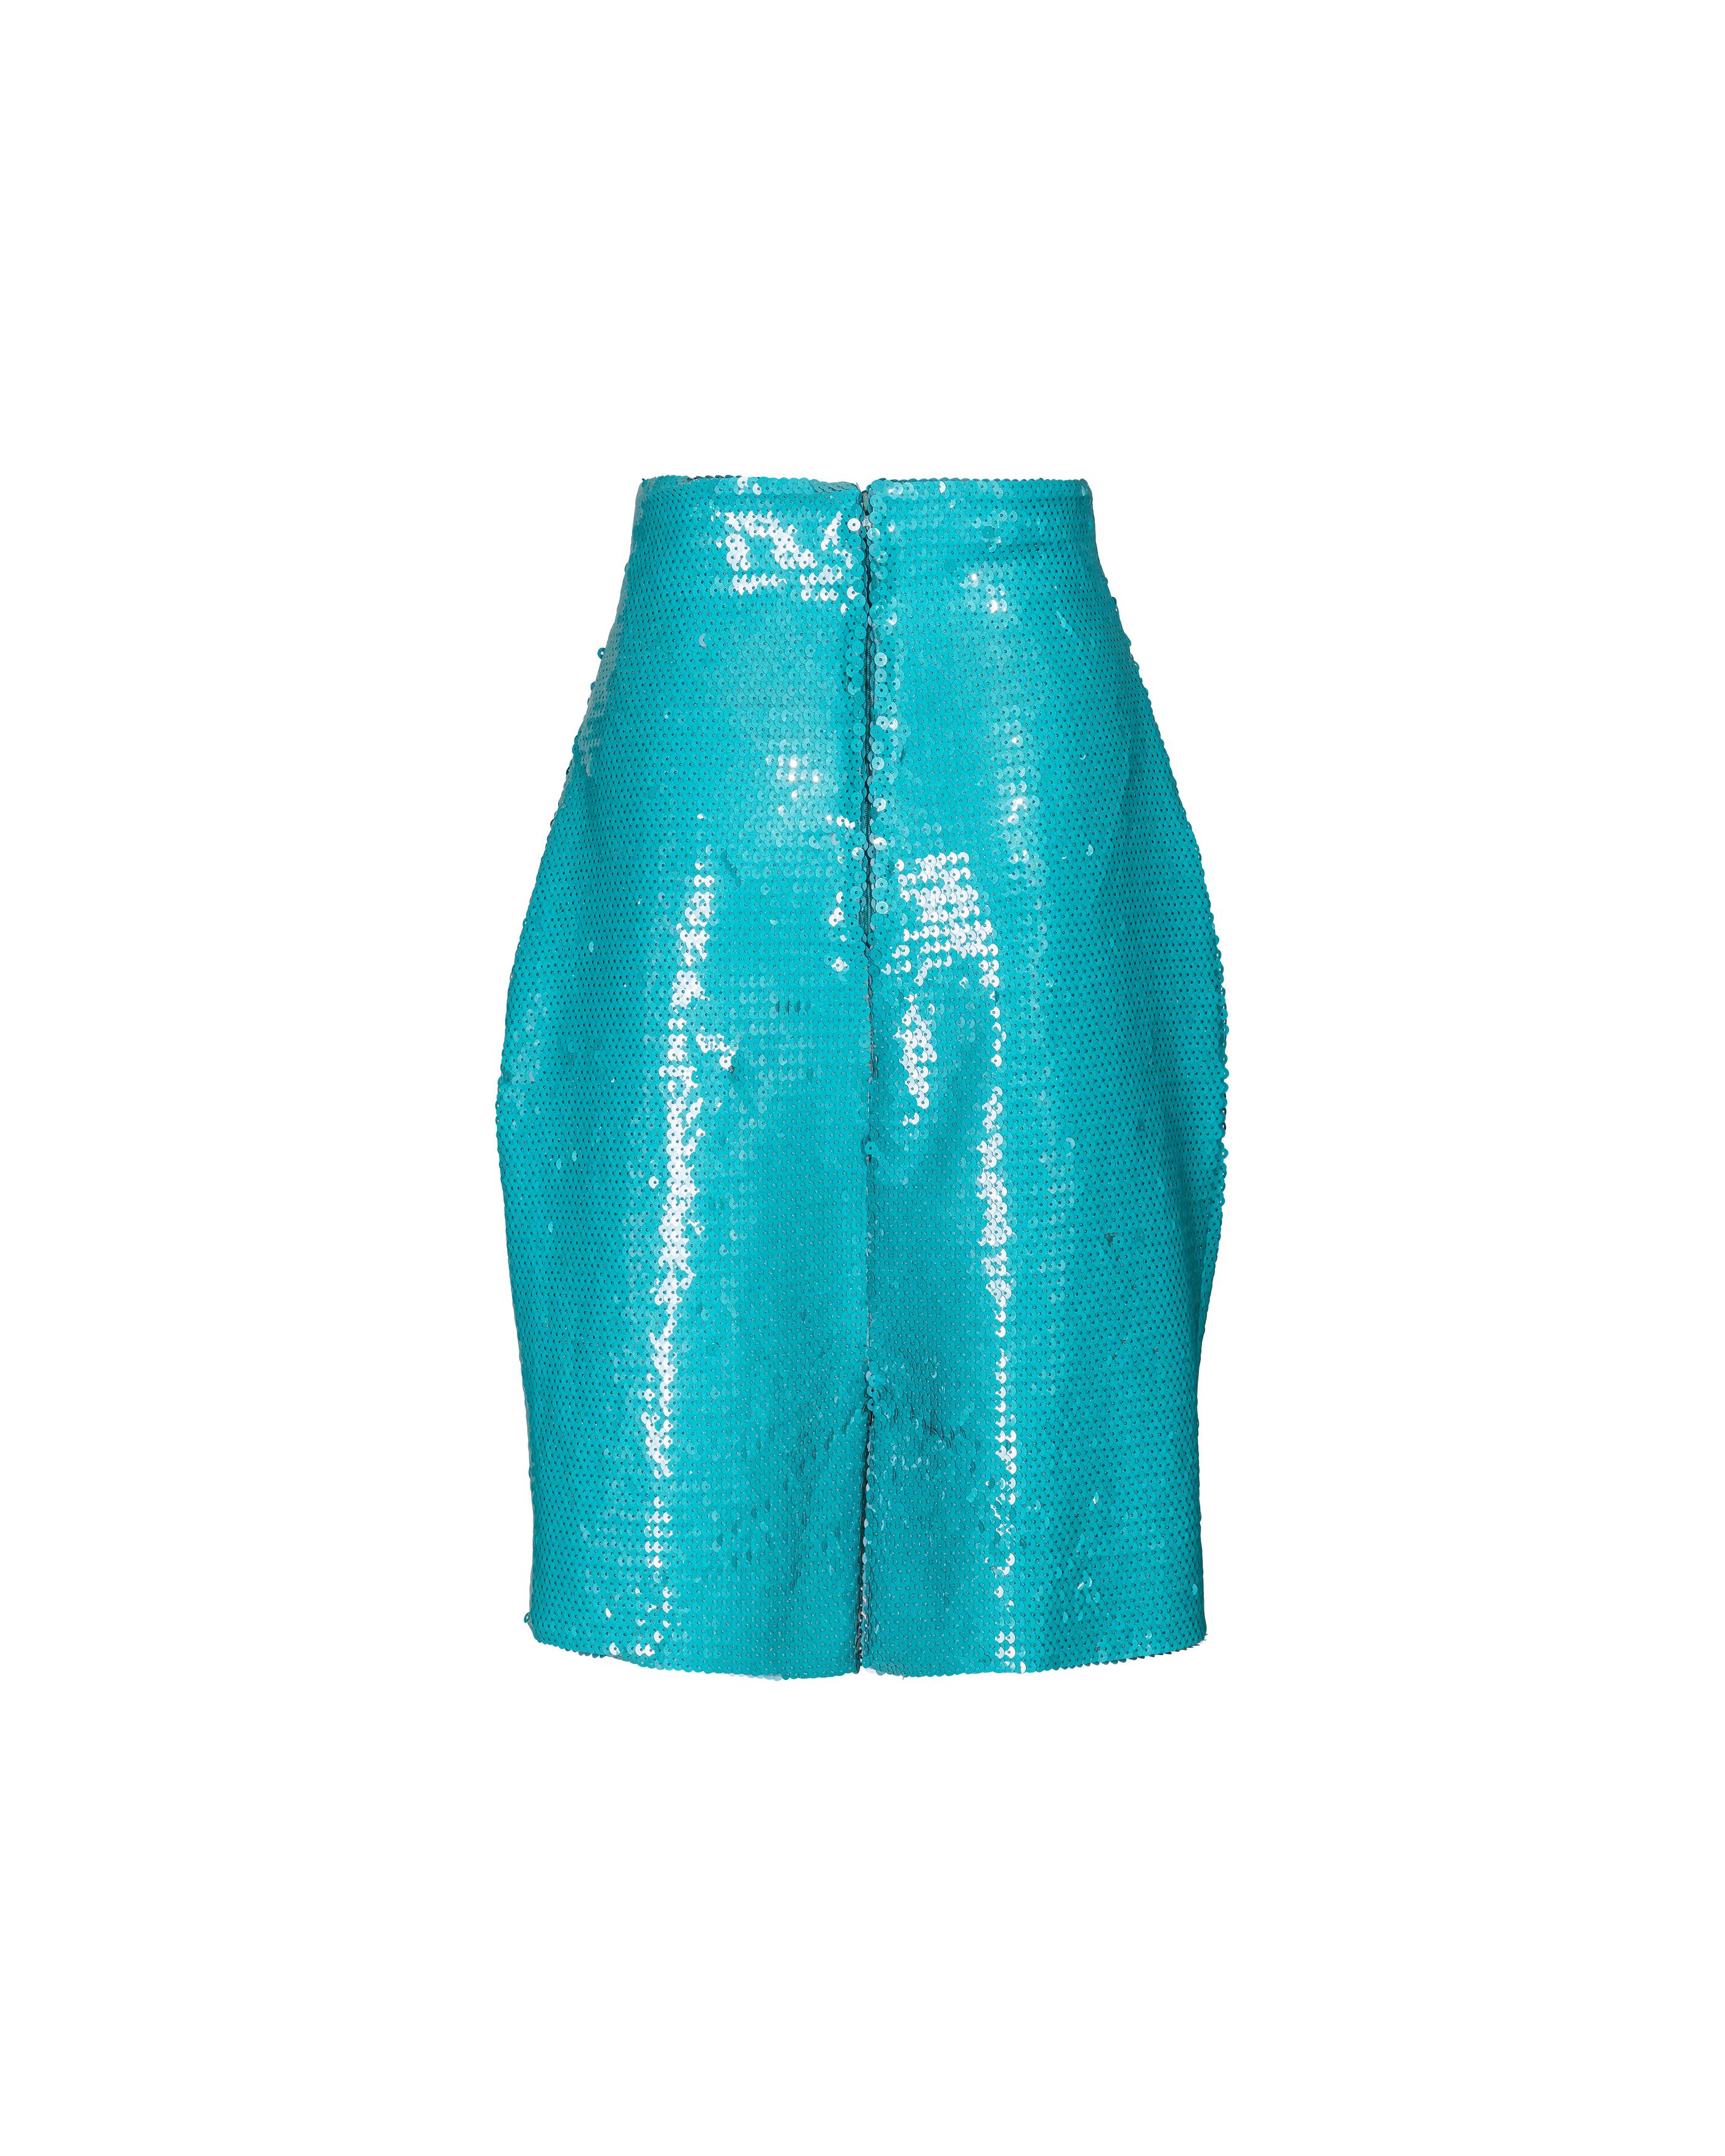 Women's 1980's Stephen Sprouse Turquoise Sequin Above-Knee Skirt For Sale